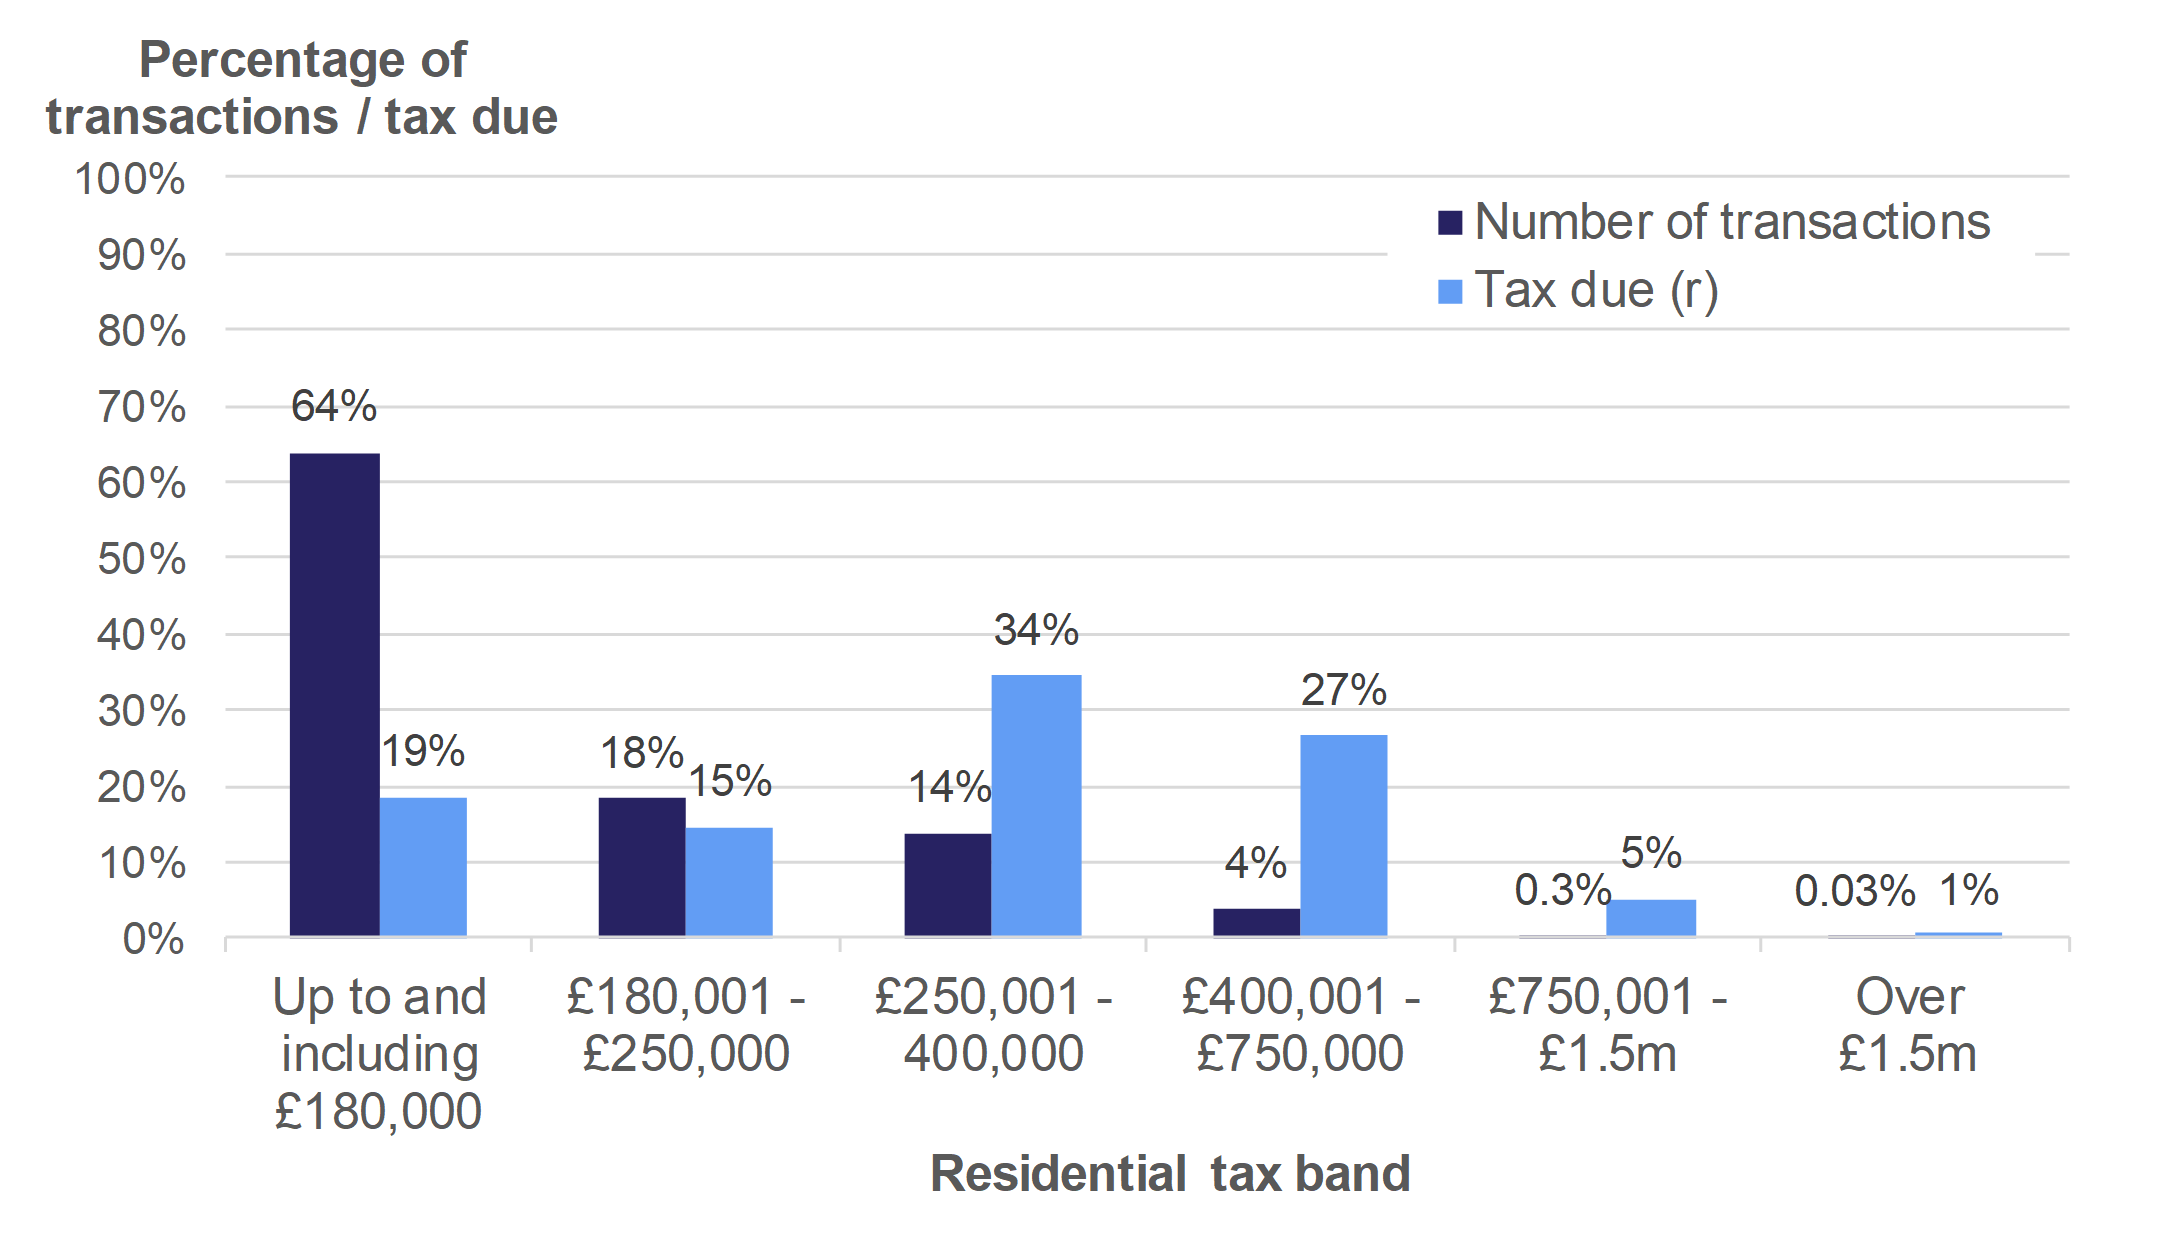 Figure 3.1 shows the number of residential transactions and amount of tax due, by residential tax band. Data is presented as the percentage of transactions or tax due and relates to transactions effective in April 2018 to March 2019.